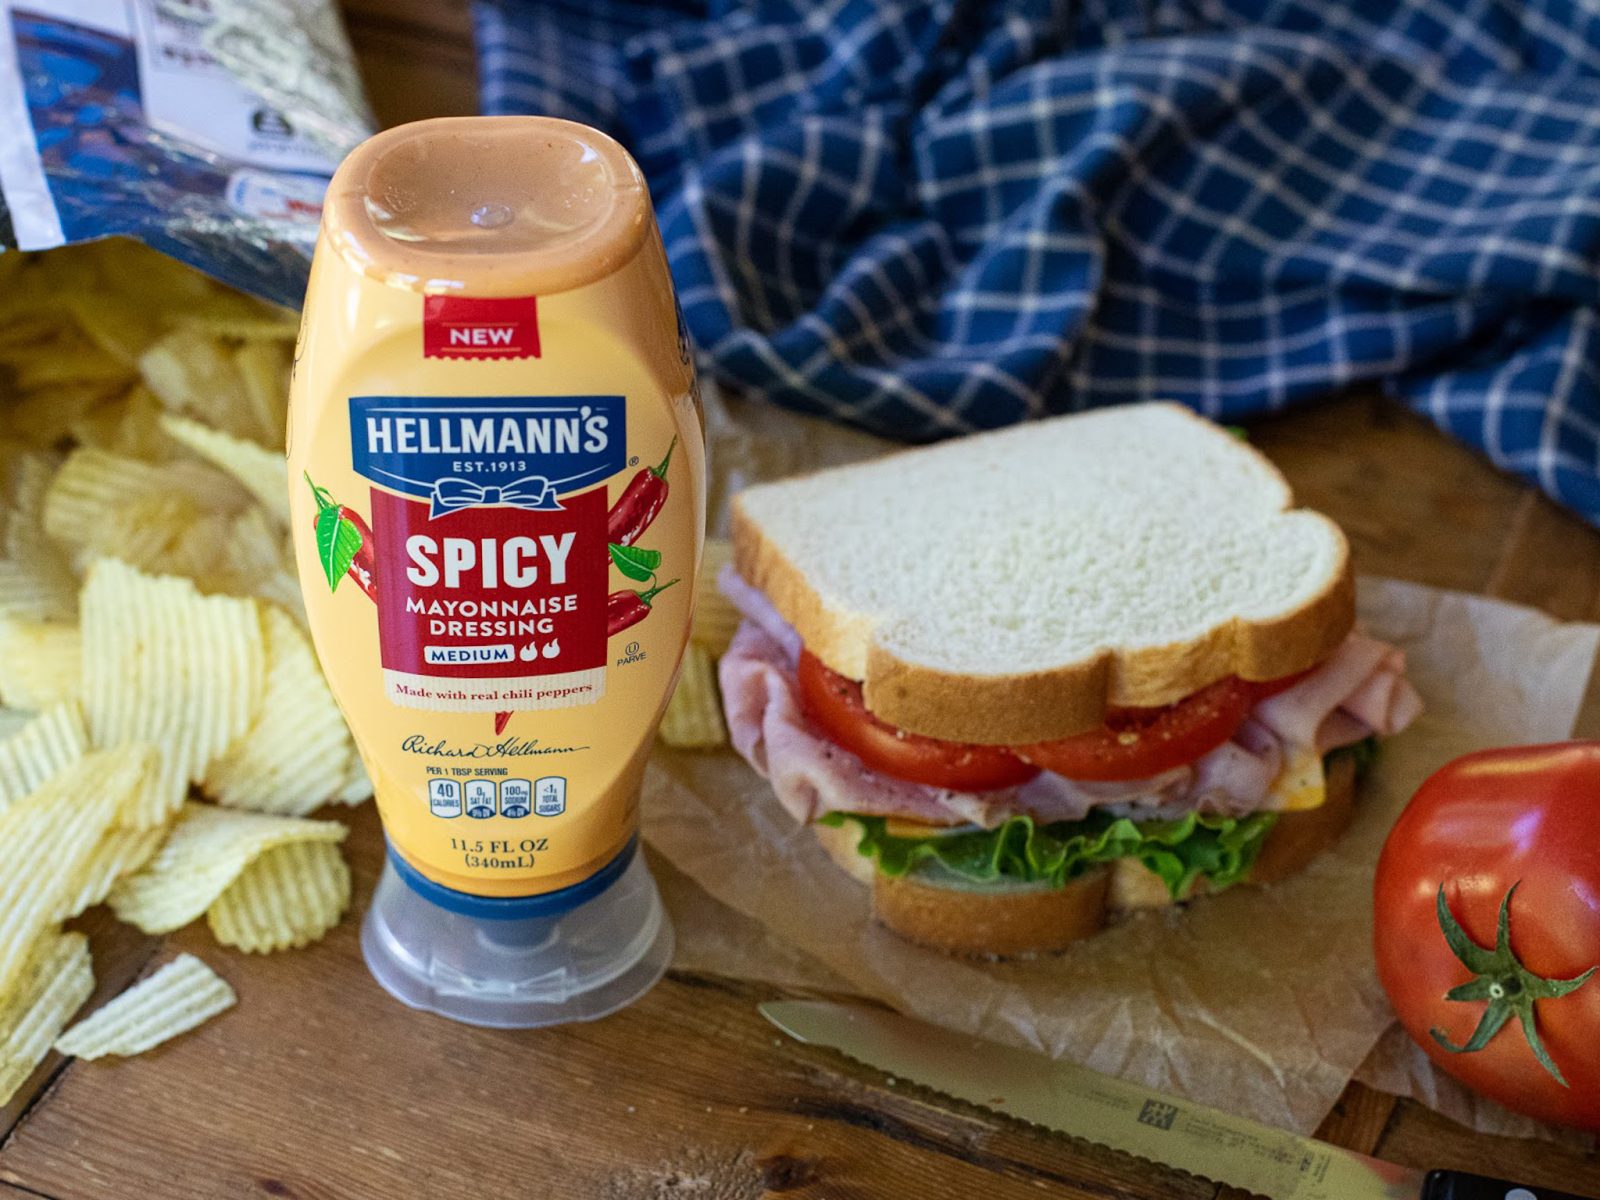 Hellmann’s Spicy Mayonnaise Dressing Just $1.25 At Publix – TODAY ONLY!